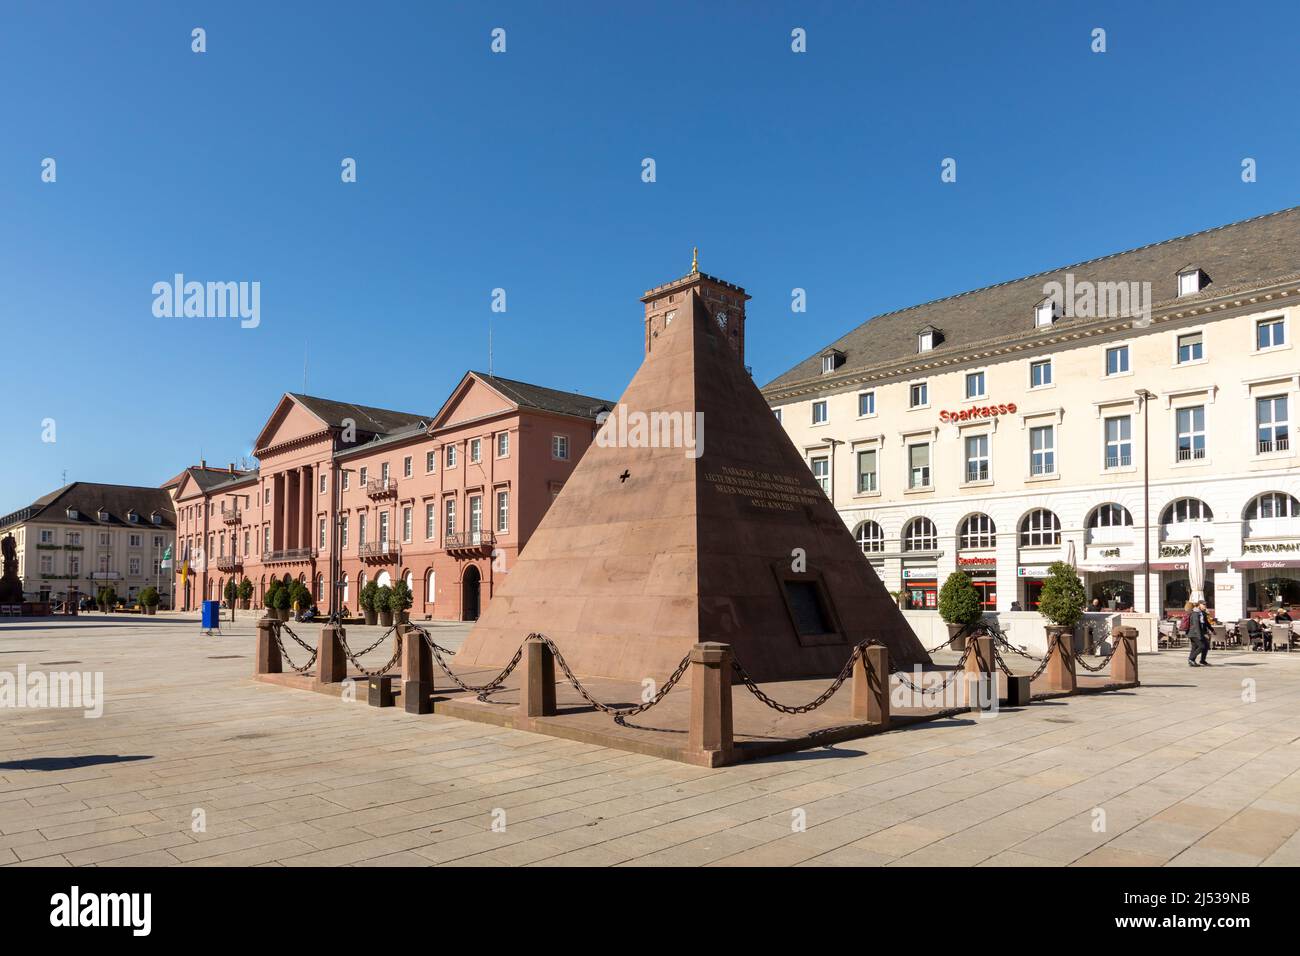 Karlsruhe, Germany - April 17, 2022: Karlsruhe Pyramid, city's founder grave, red sandstone monument located on market square of Karlsruhe. Stock Photo